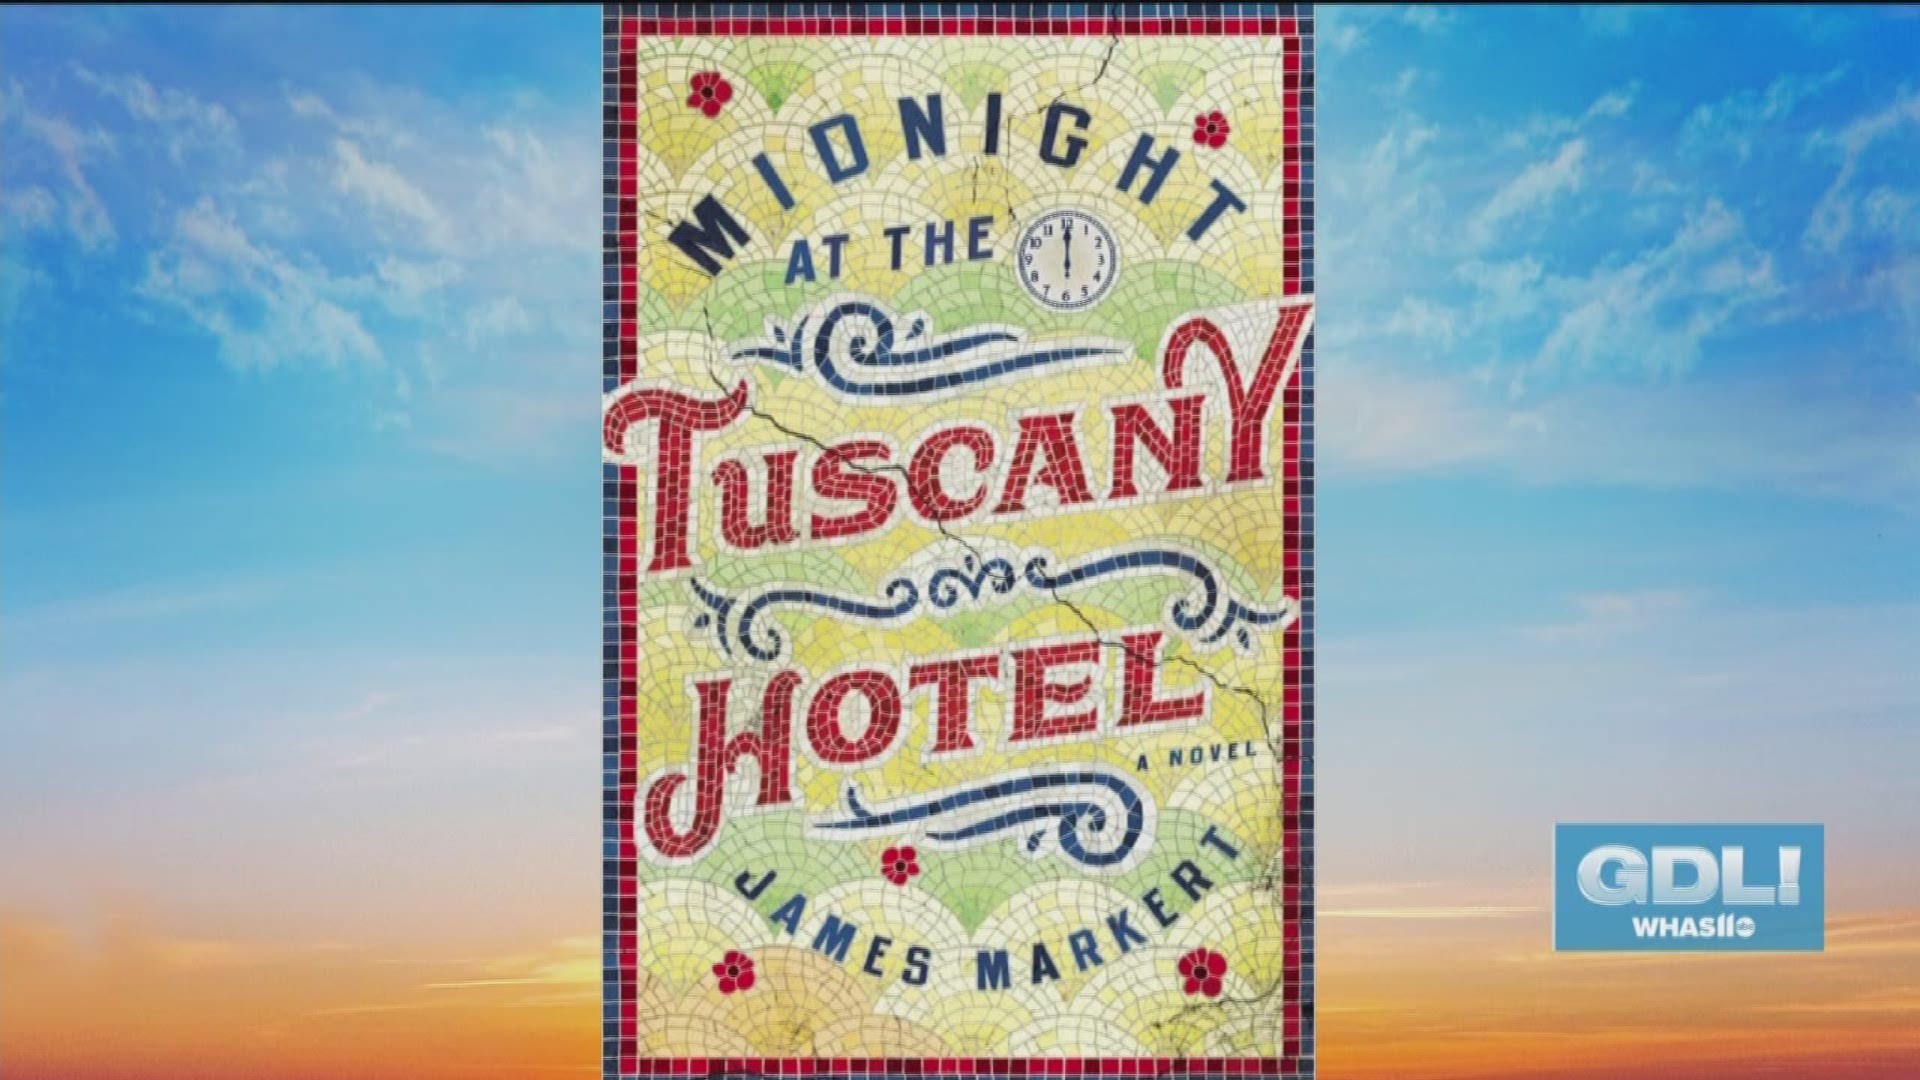 James Markert's new novel, Midnight at the Tuscany Hotel, is a historical novel inspired by his father, Bob Markert, who is a sculptor and stained-glass window maker.